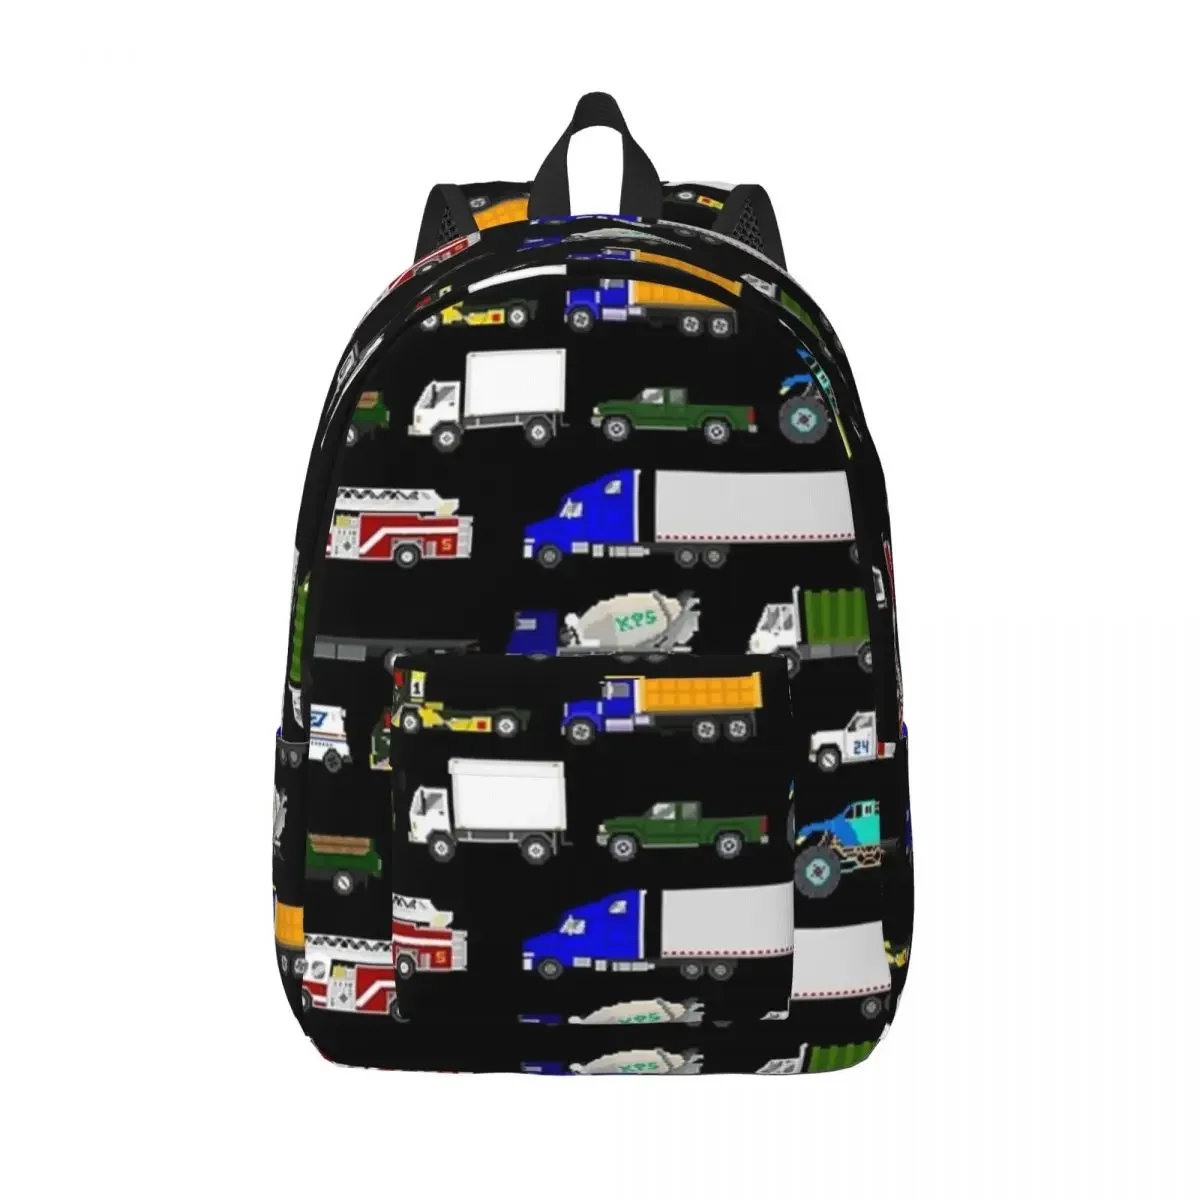 

Trucks - The Kids Picture Show Woman Small Backpack Boys Girls Bookbag Fashion Shoulder Bag Laptop Rucksack Students School Bags